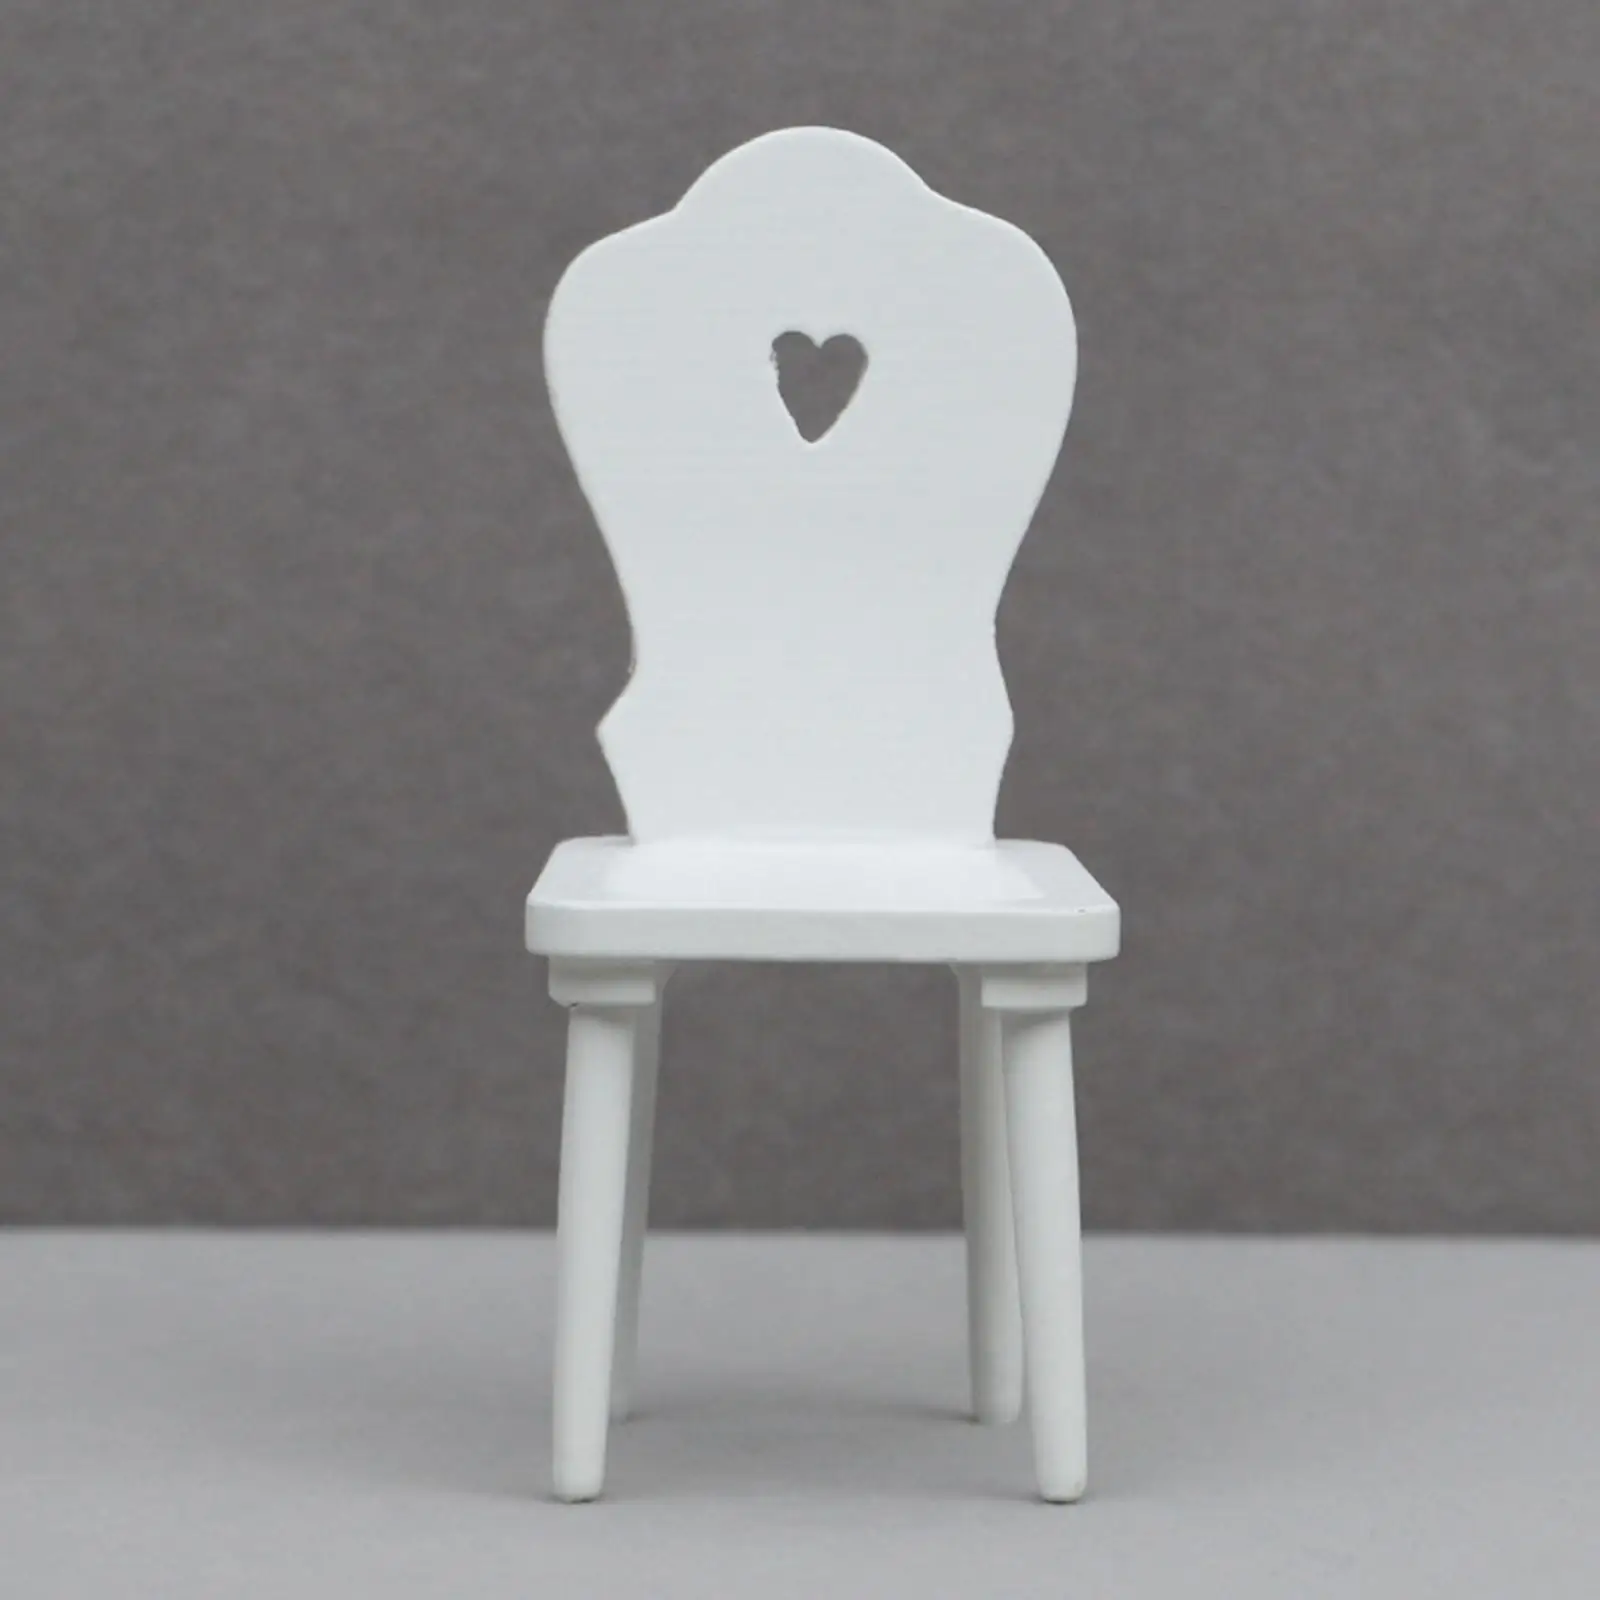 1/12 Miniature Chair Ornament 1/12 Miniature Chair Model for Balcony Bedroom